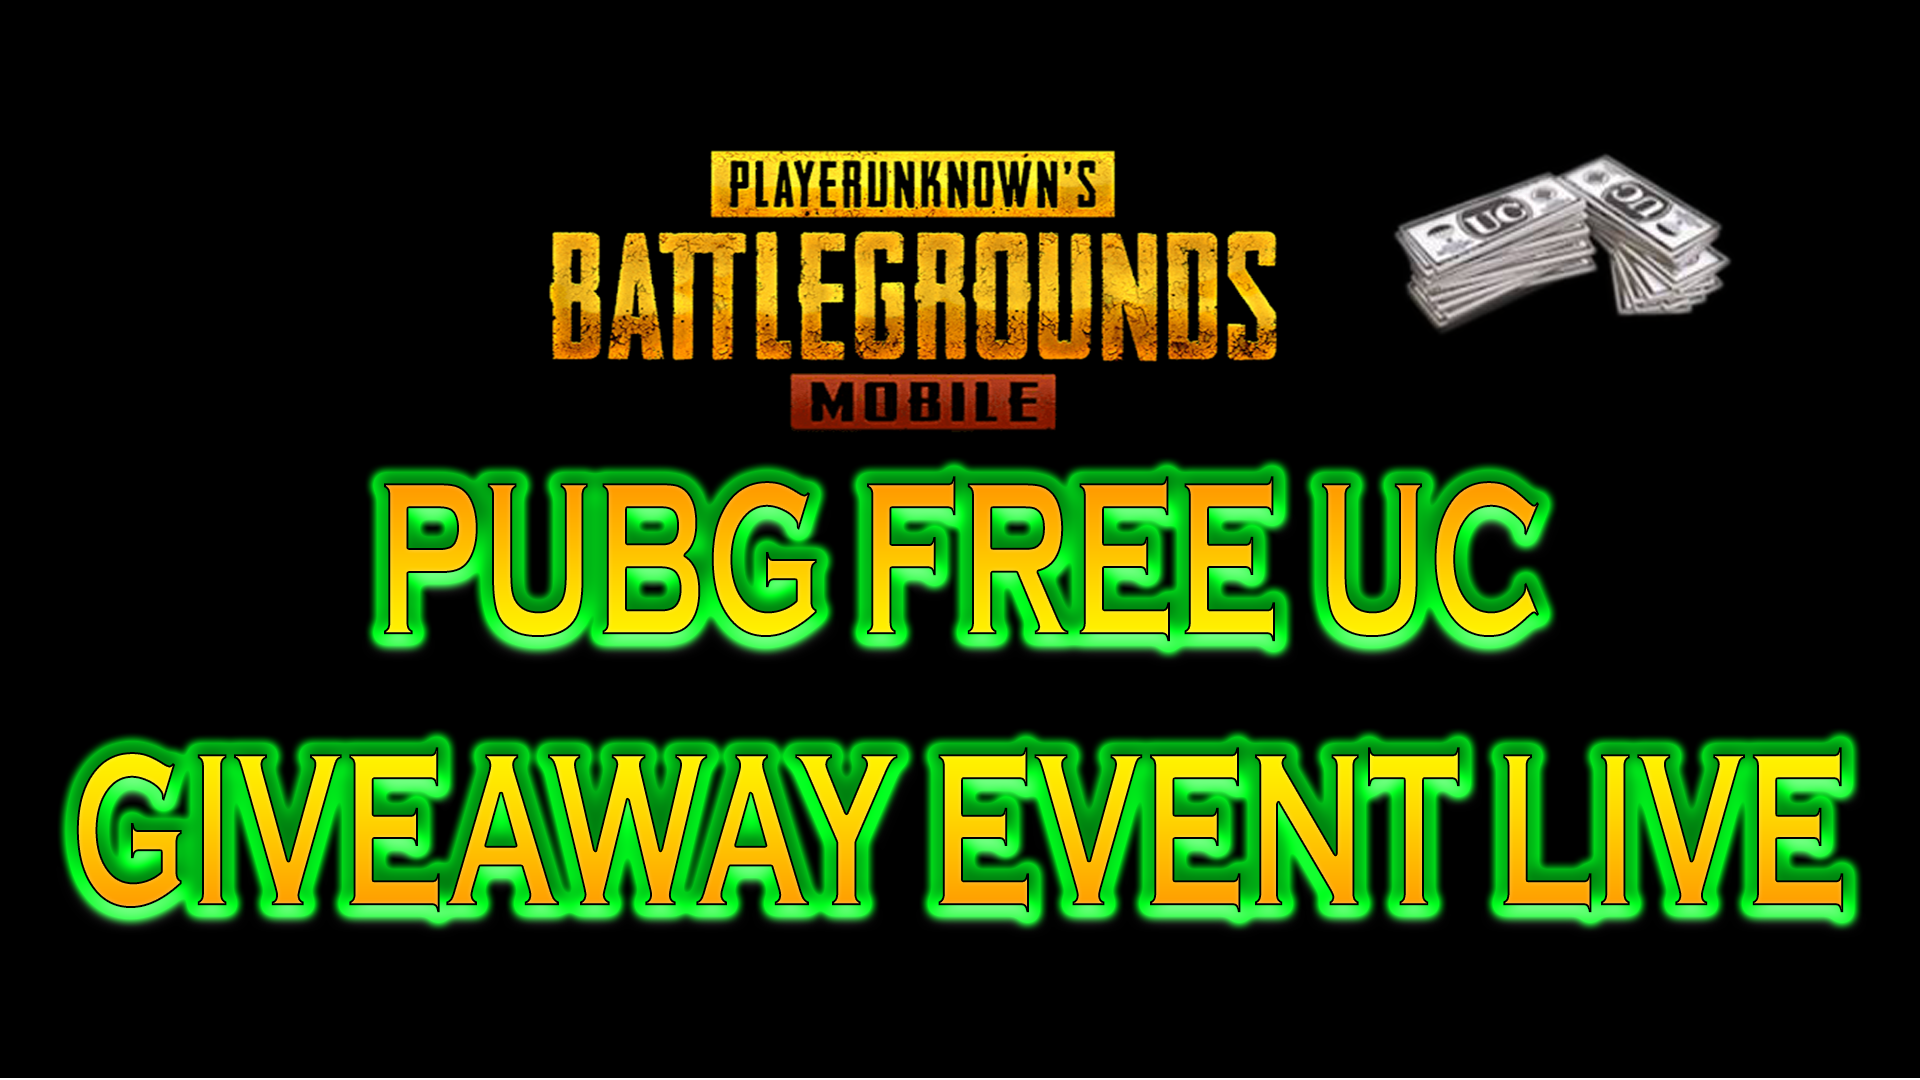 8th Pubg Free Uc Giveaway Event Hurry Gaming Giveaways And Events - uc event png